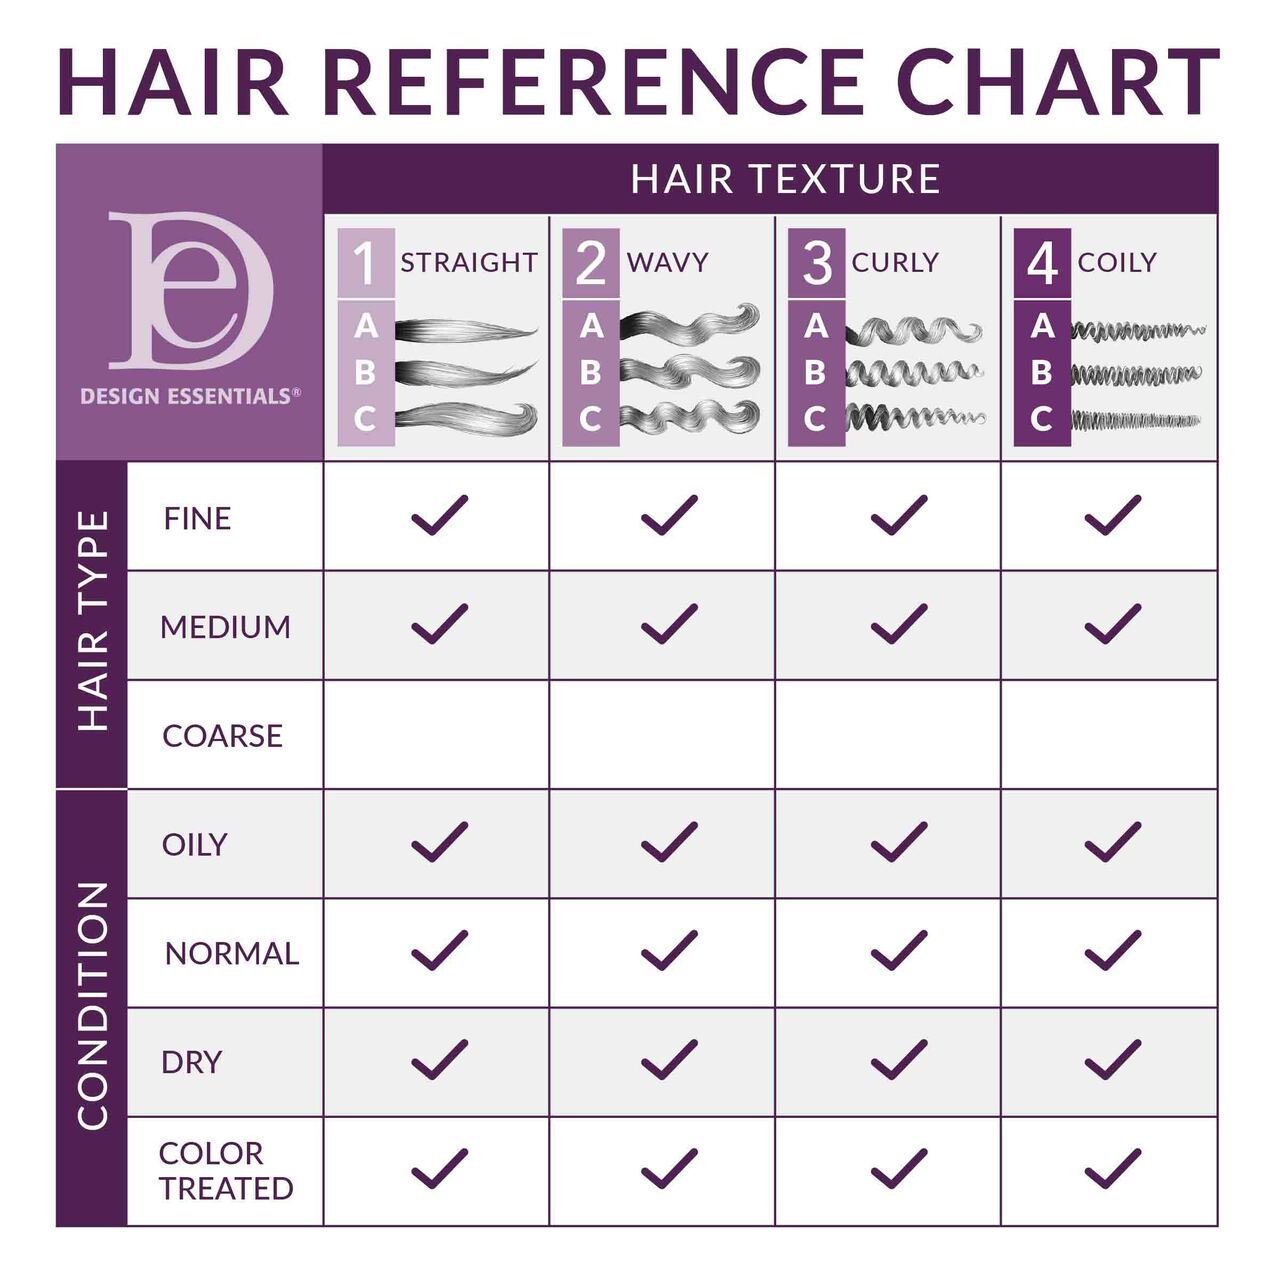 Agave_Lavender_Weightless_Thermal_Protectant_Serum_-_Hair_Reference_Chart__